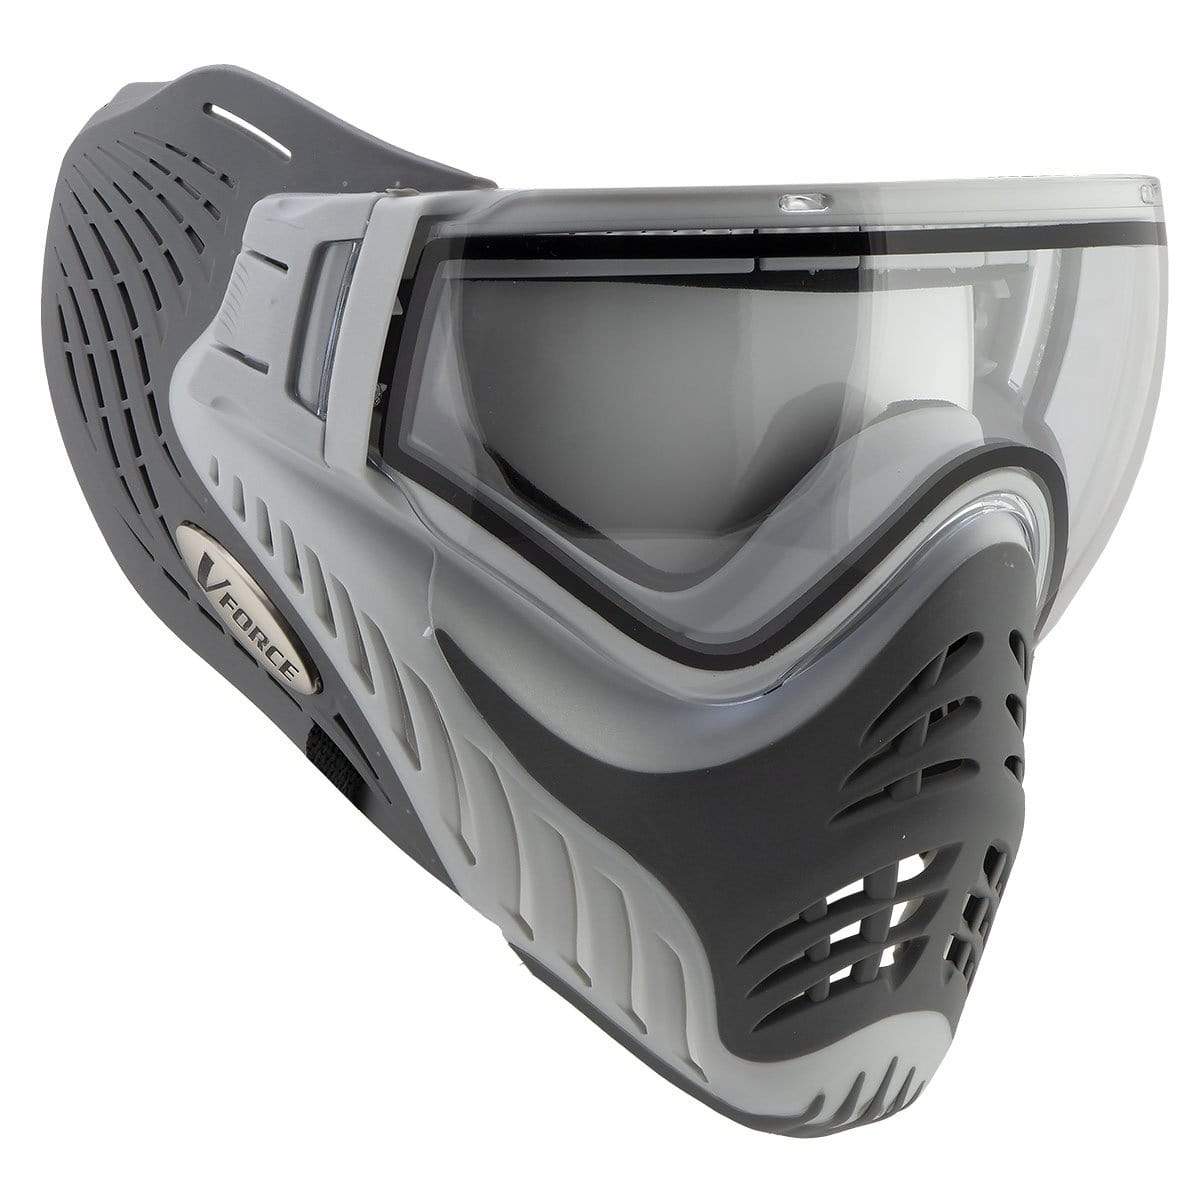 VForce Profiler - Sable (Silver on Charcoal) - Eminent Paintball And Airsoft